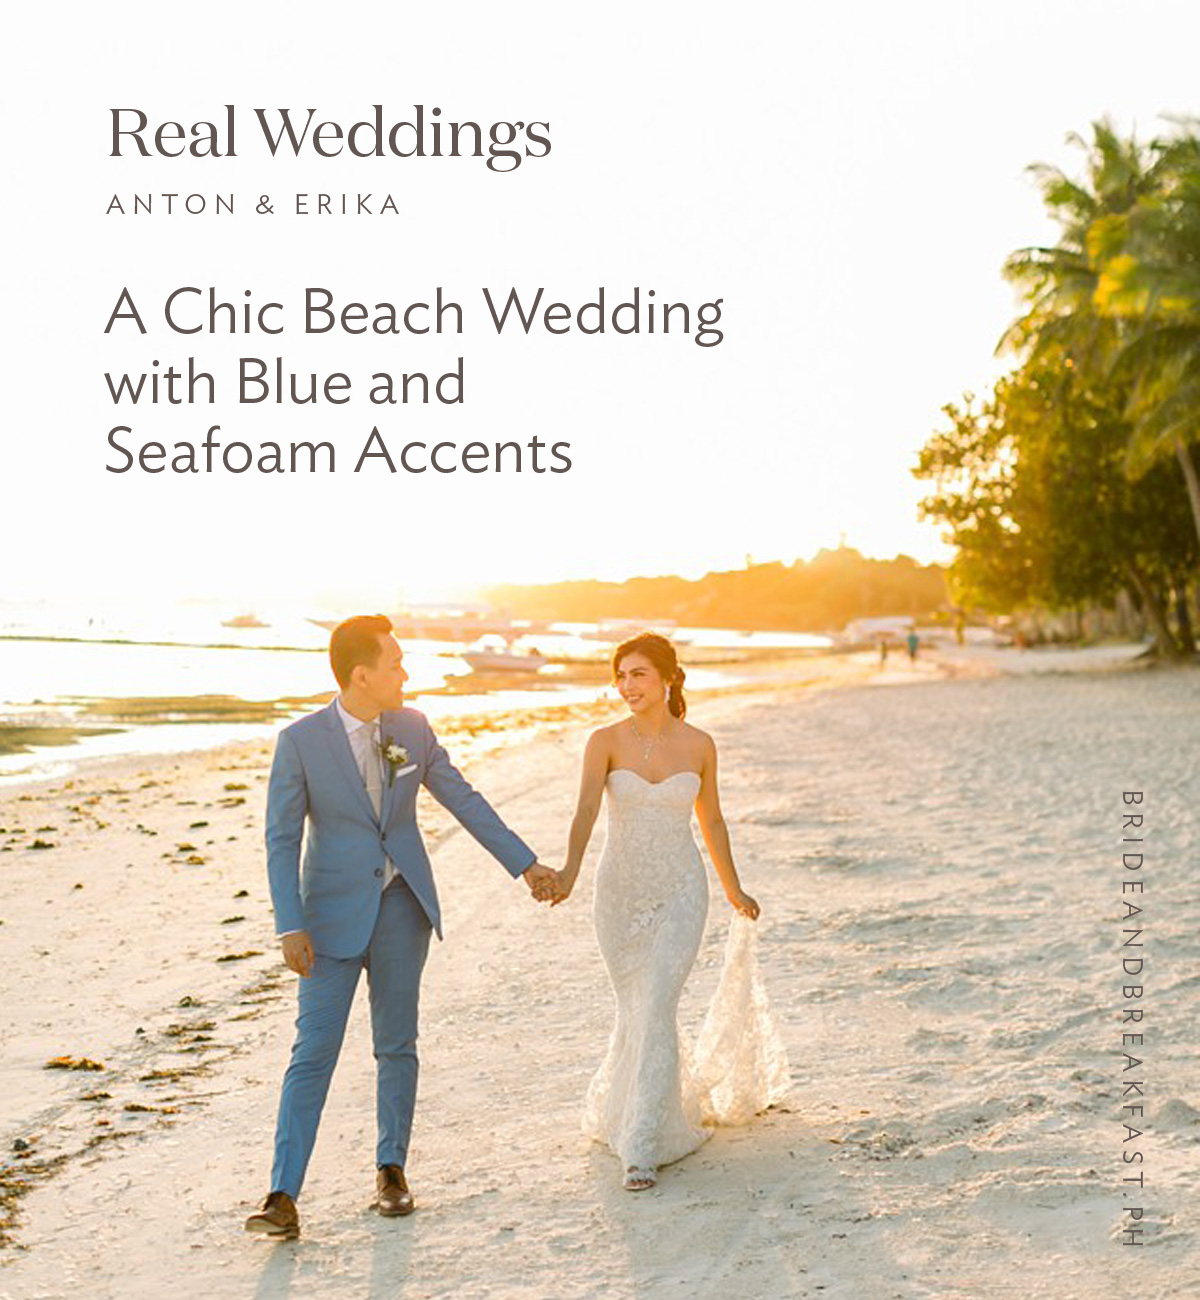 A Chic Beach Wedding with Blue and Seafoam Accents